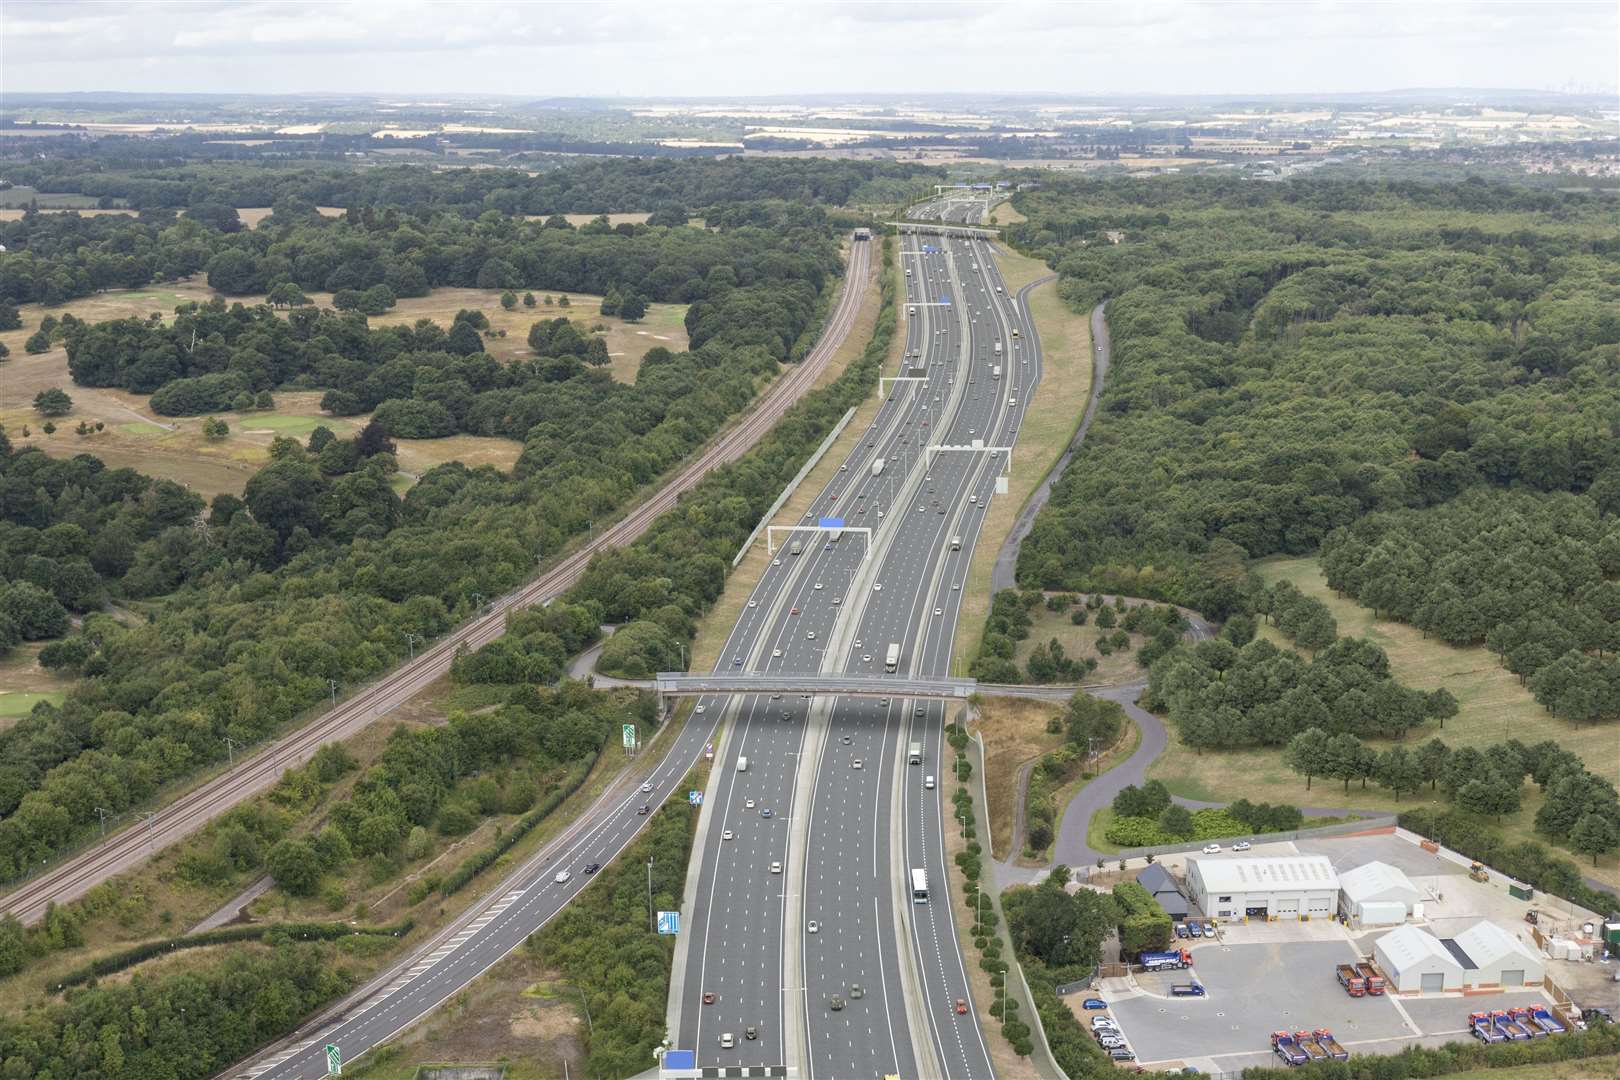 The approach to the tunnel on the Kent side showing the route towards the southern entrance of the Lower Thames Crossing from the A2. Picture: Highways England/Joas Souza Photographer